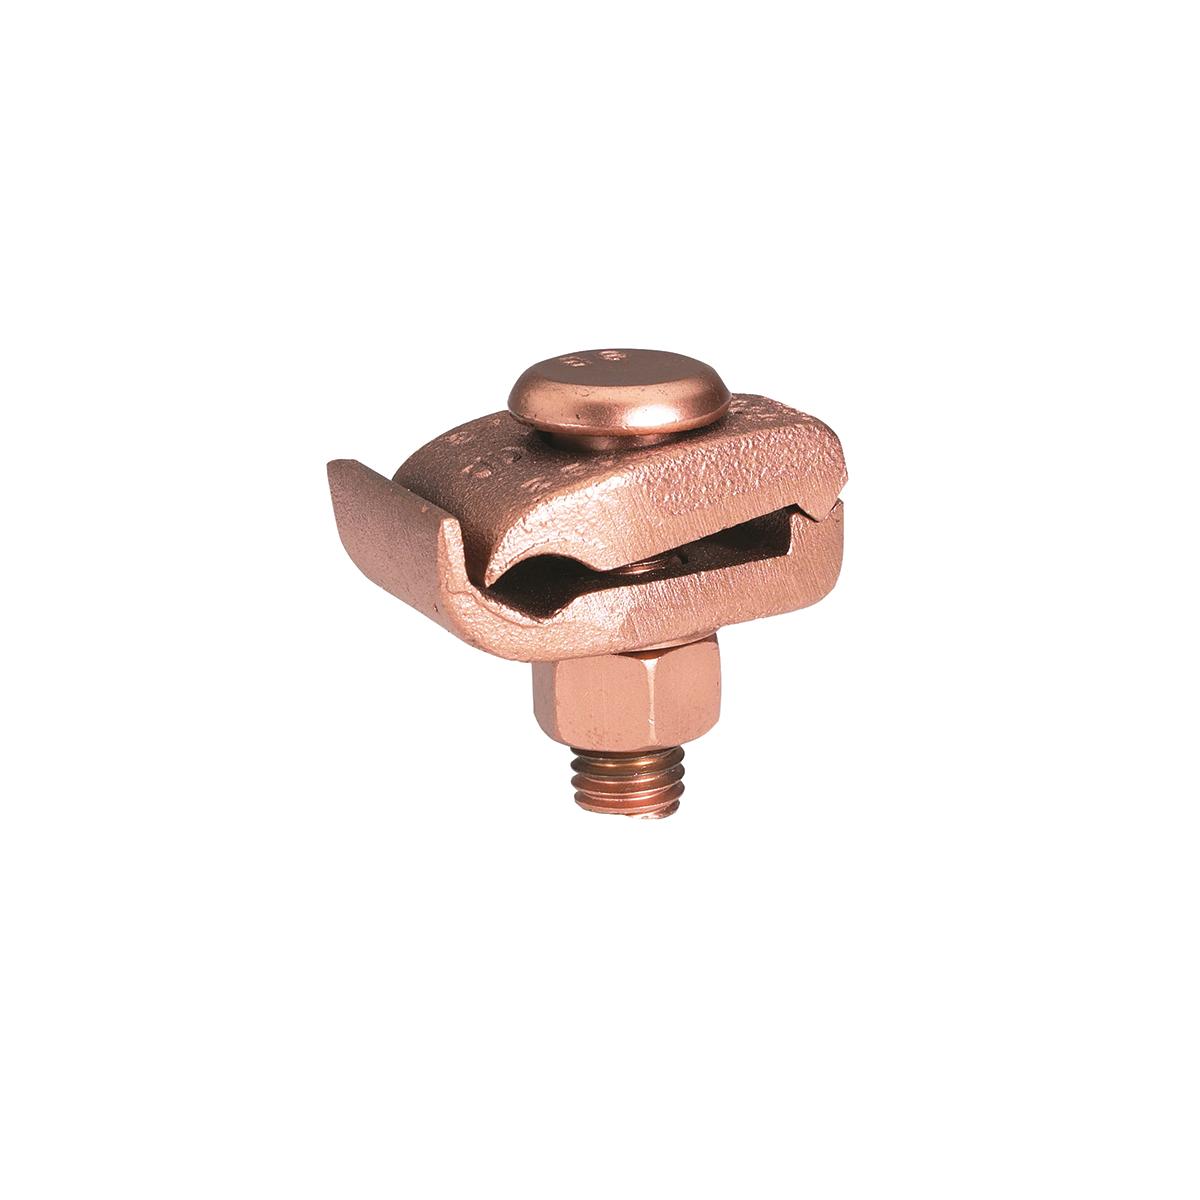 Hubbell GB34G15 Accommodates: 300-500 kcmil; Bar: 1/4"; For assembly use: 1/2-13 UNC2A X 2.25 long silicon bronze bolt, nut, and split lock washer. 